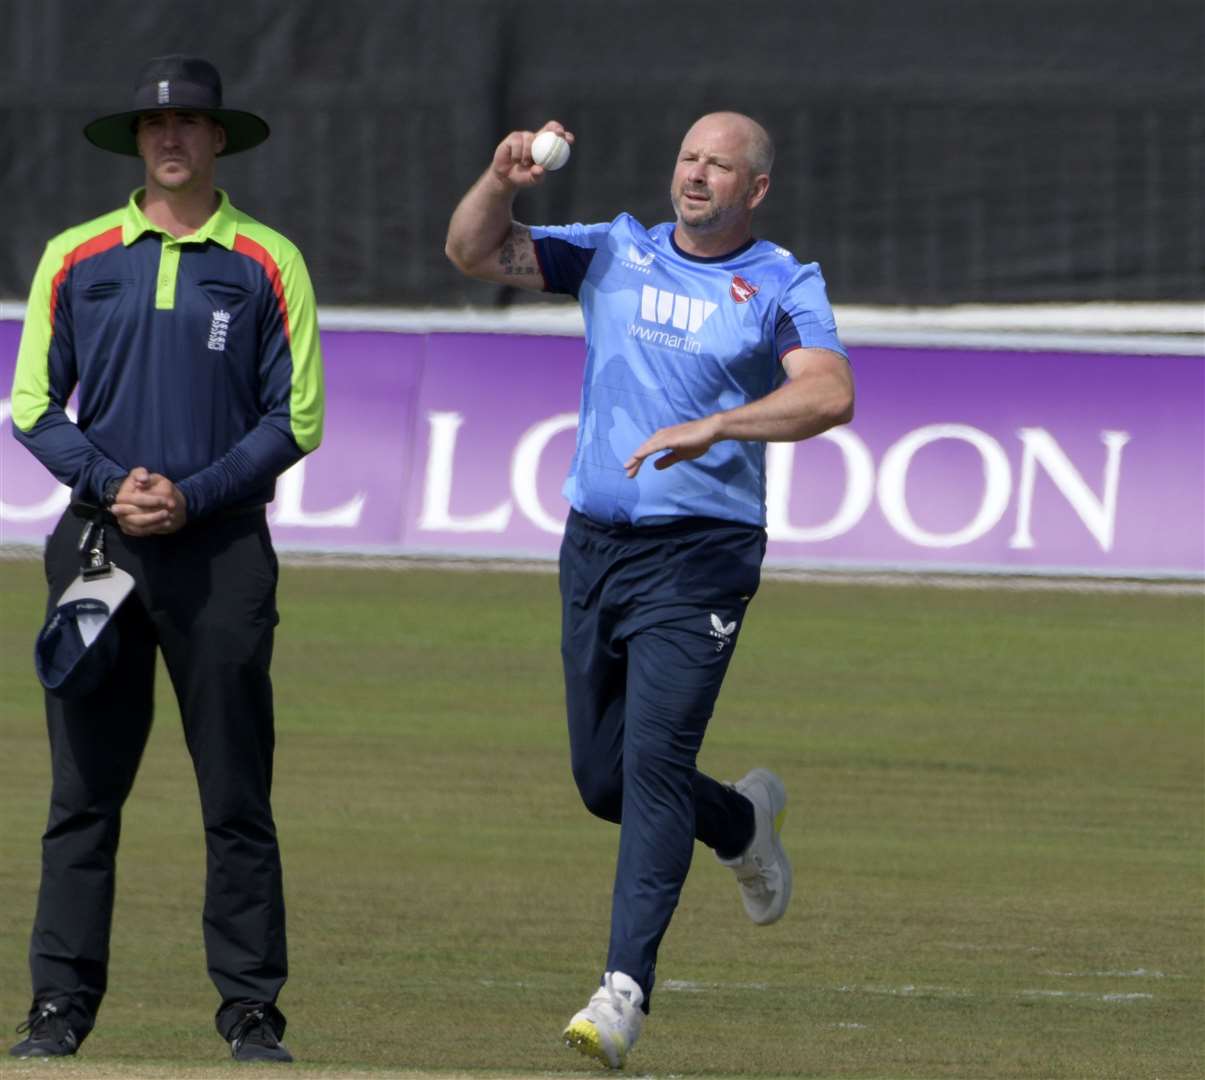 Darren Stevens bowling as he made what could be his final white-ball appearance for Kent at home against Lancashire in Canterbury. Picture: Barry Goodwin